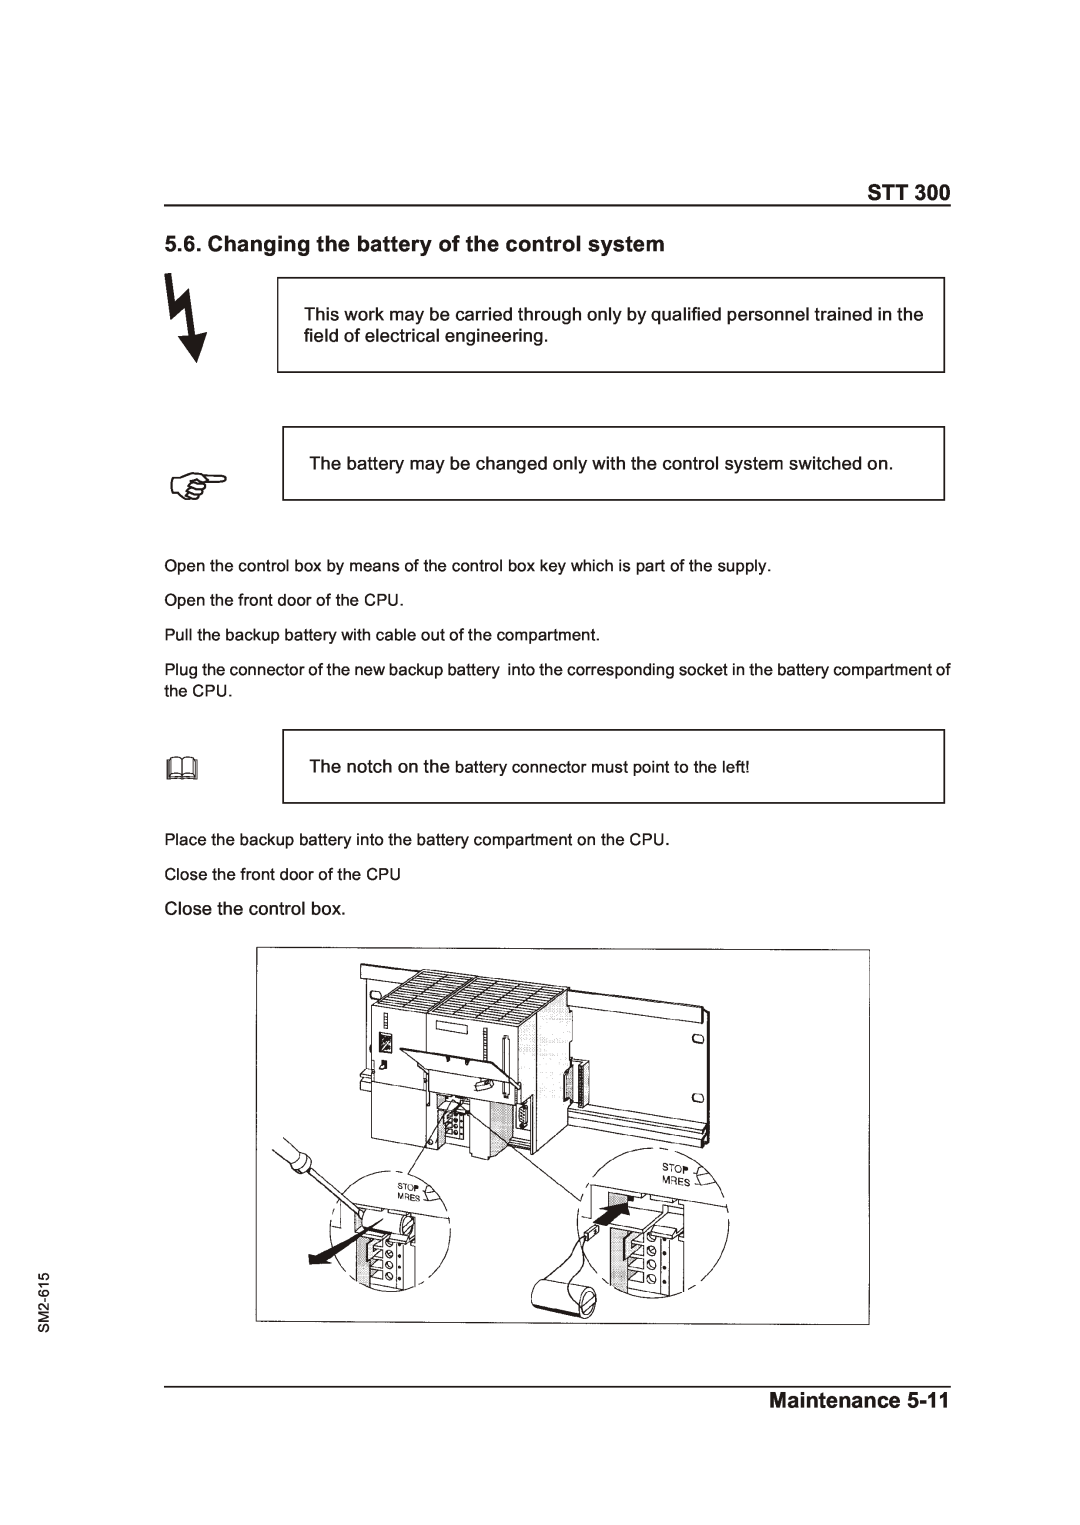 Sterling STT 300 operating instructions Changing the battery of the control system, Maintenance 